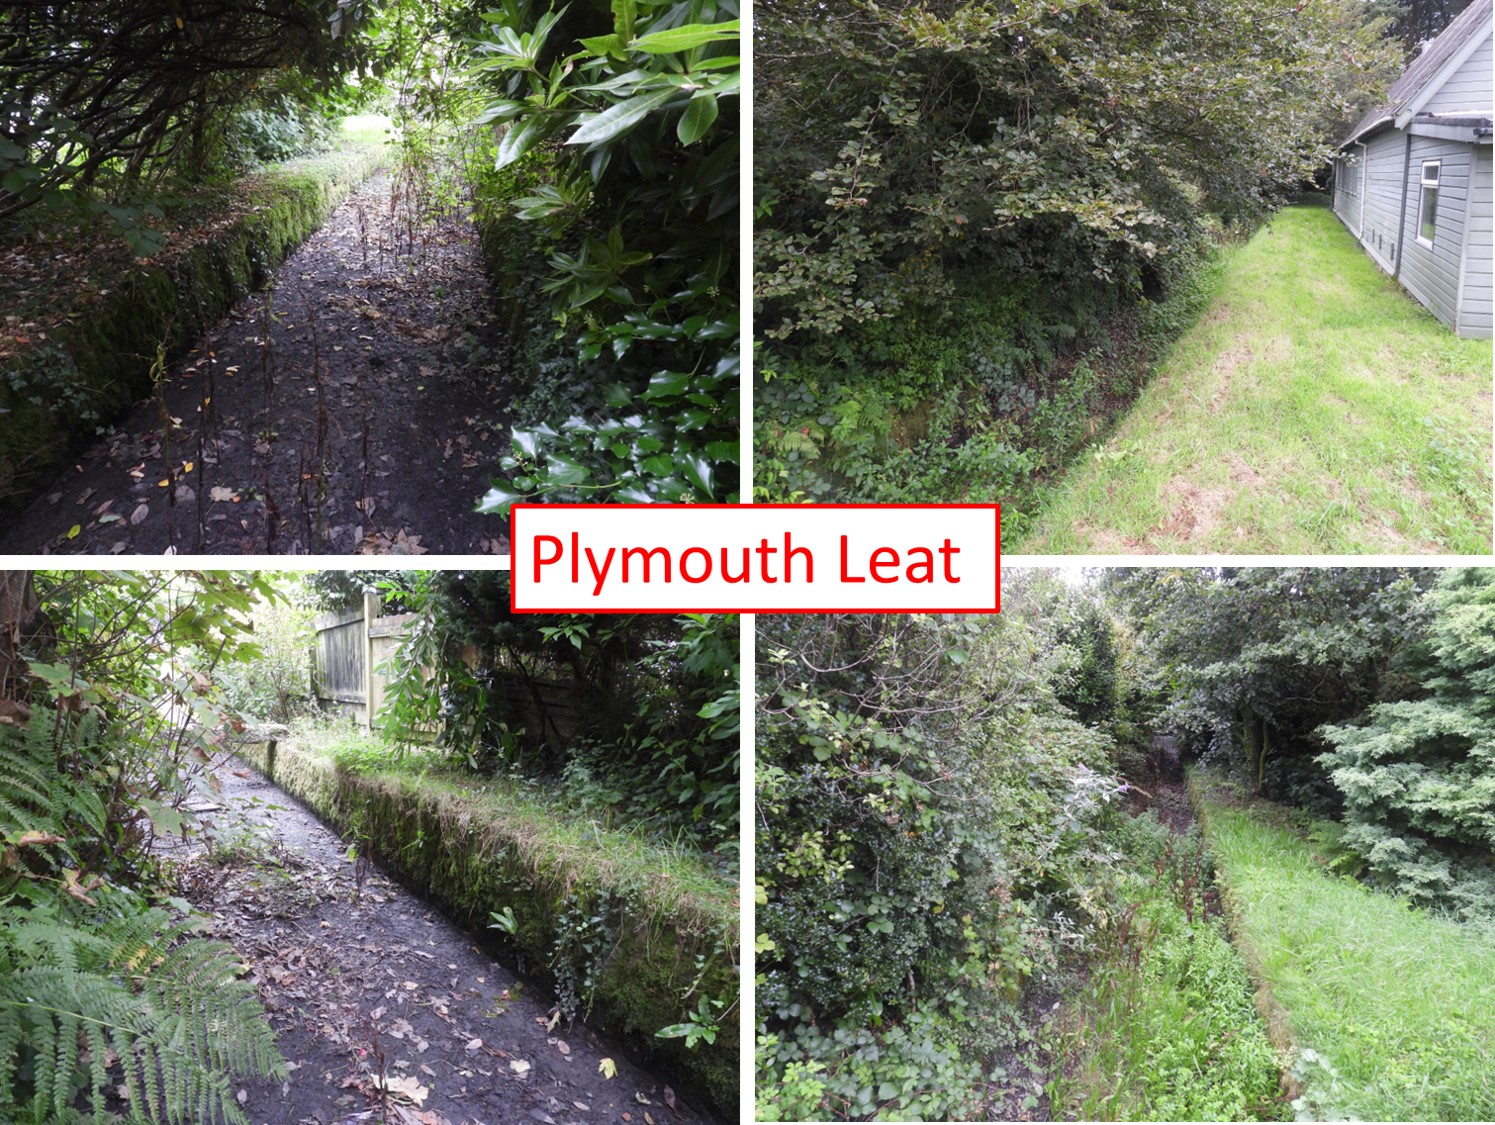 3. Plymouth Leat